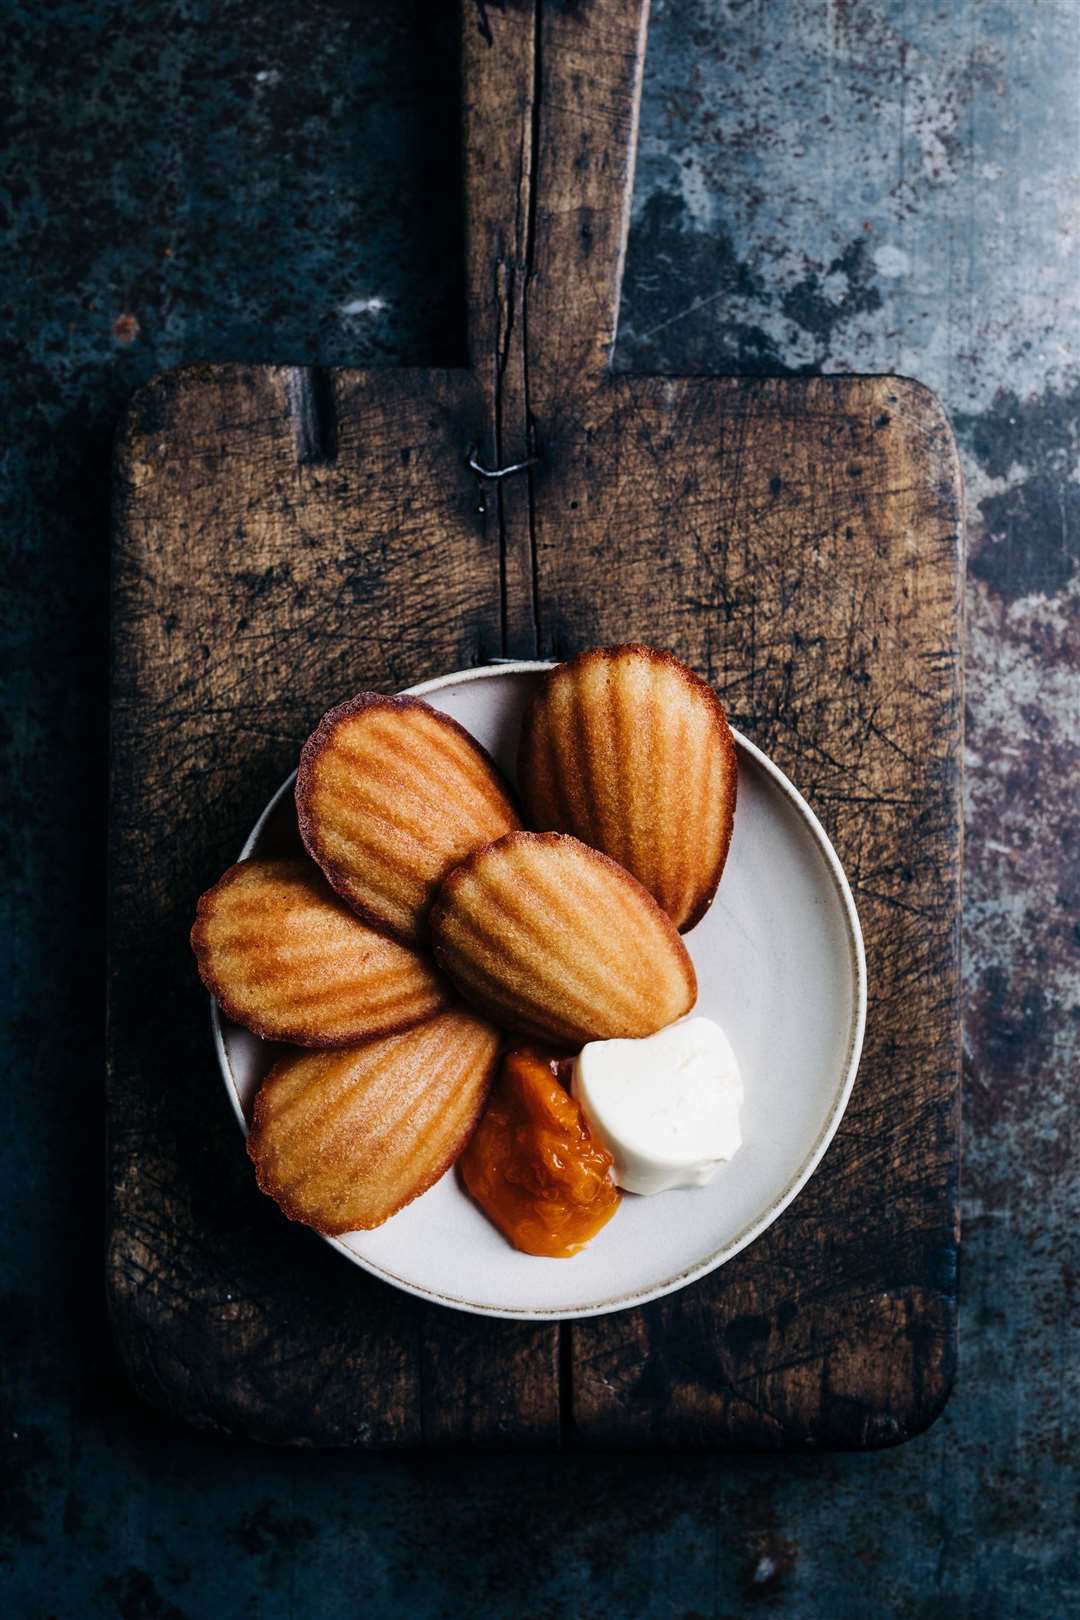 Honey madeleines. Picture: Adam Gibson/PA